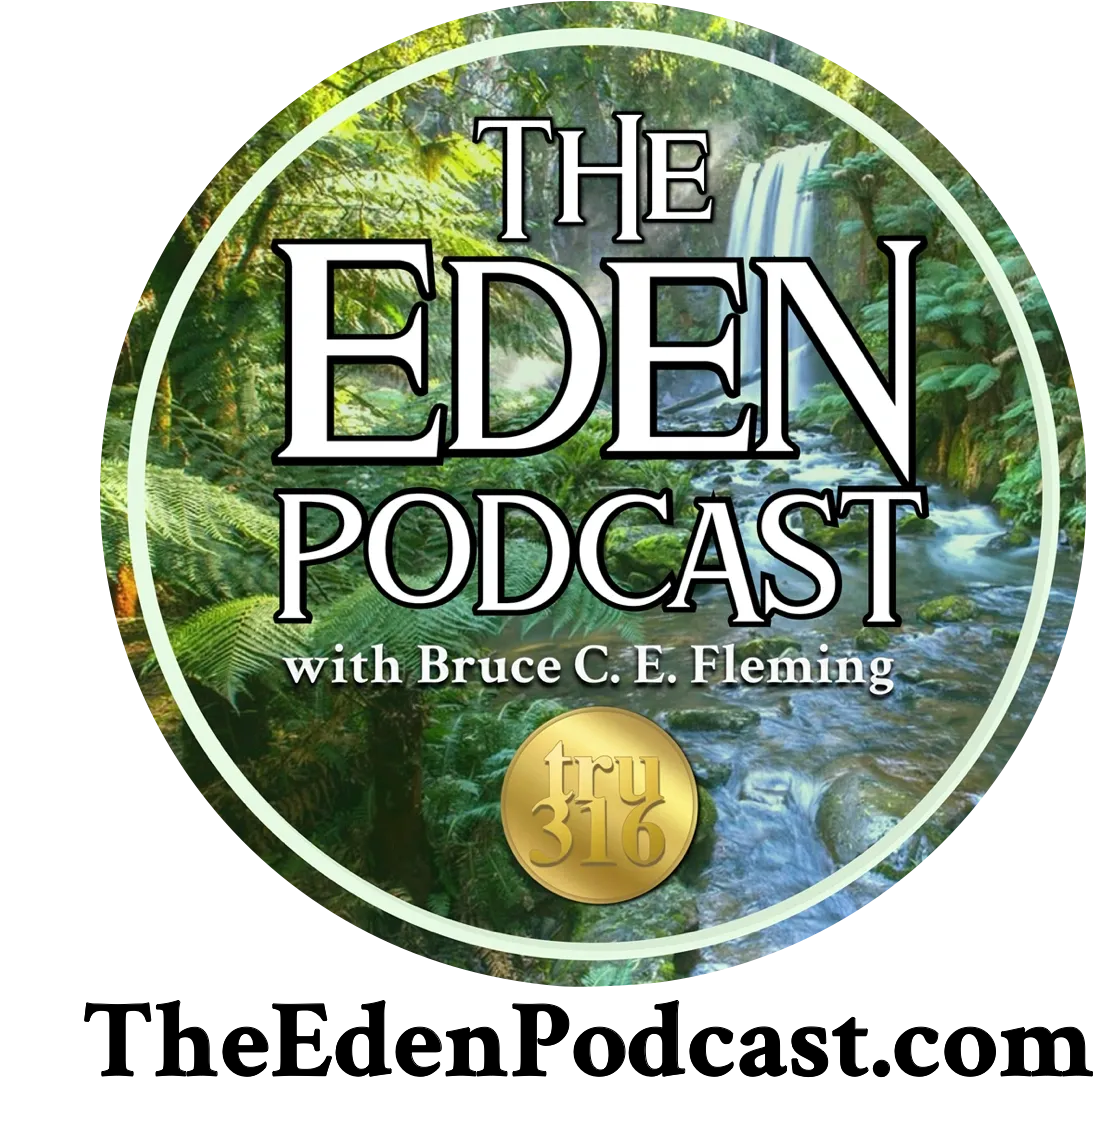 It happened just now! 100,000 downloads of The Eden Podcast!